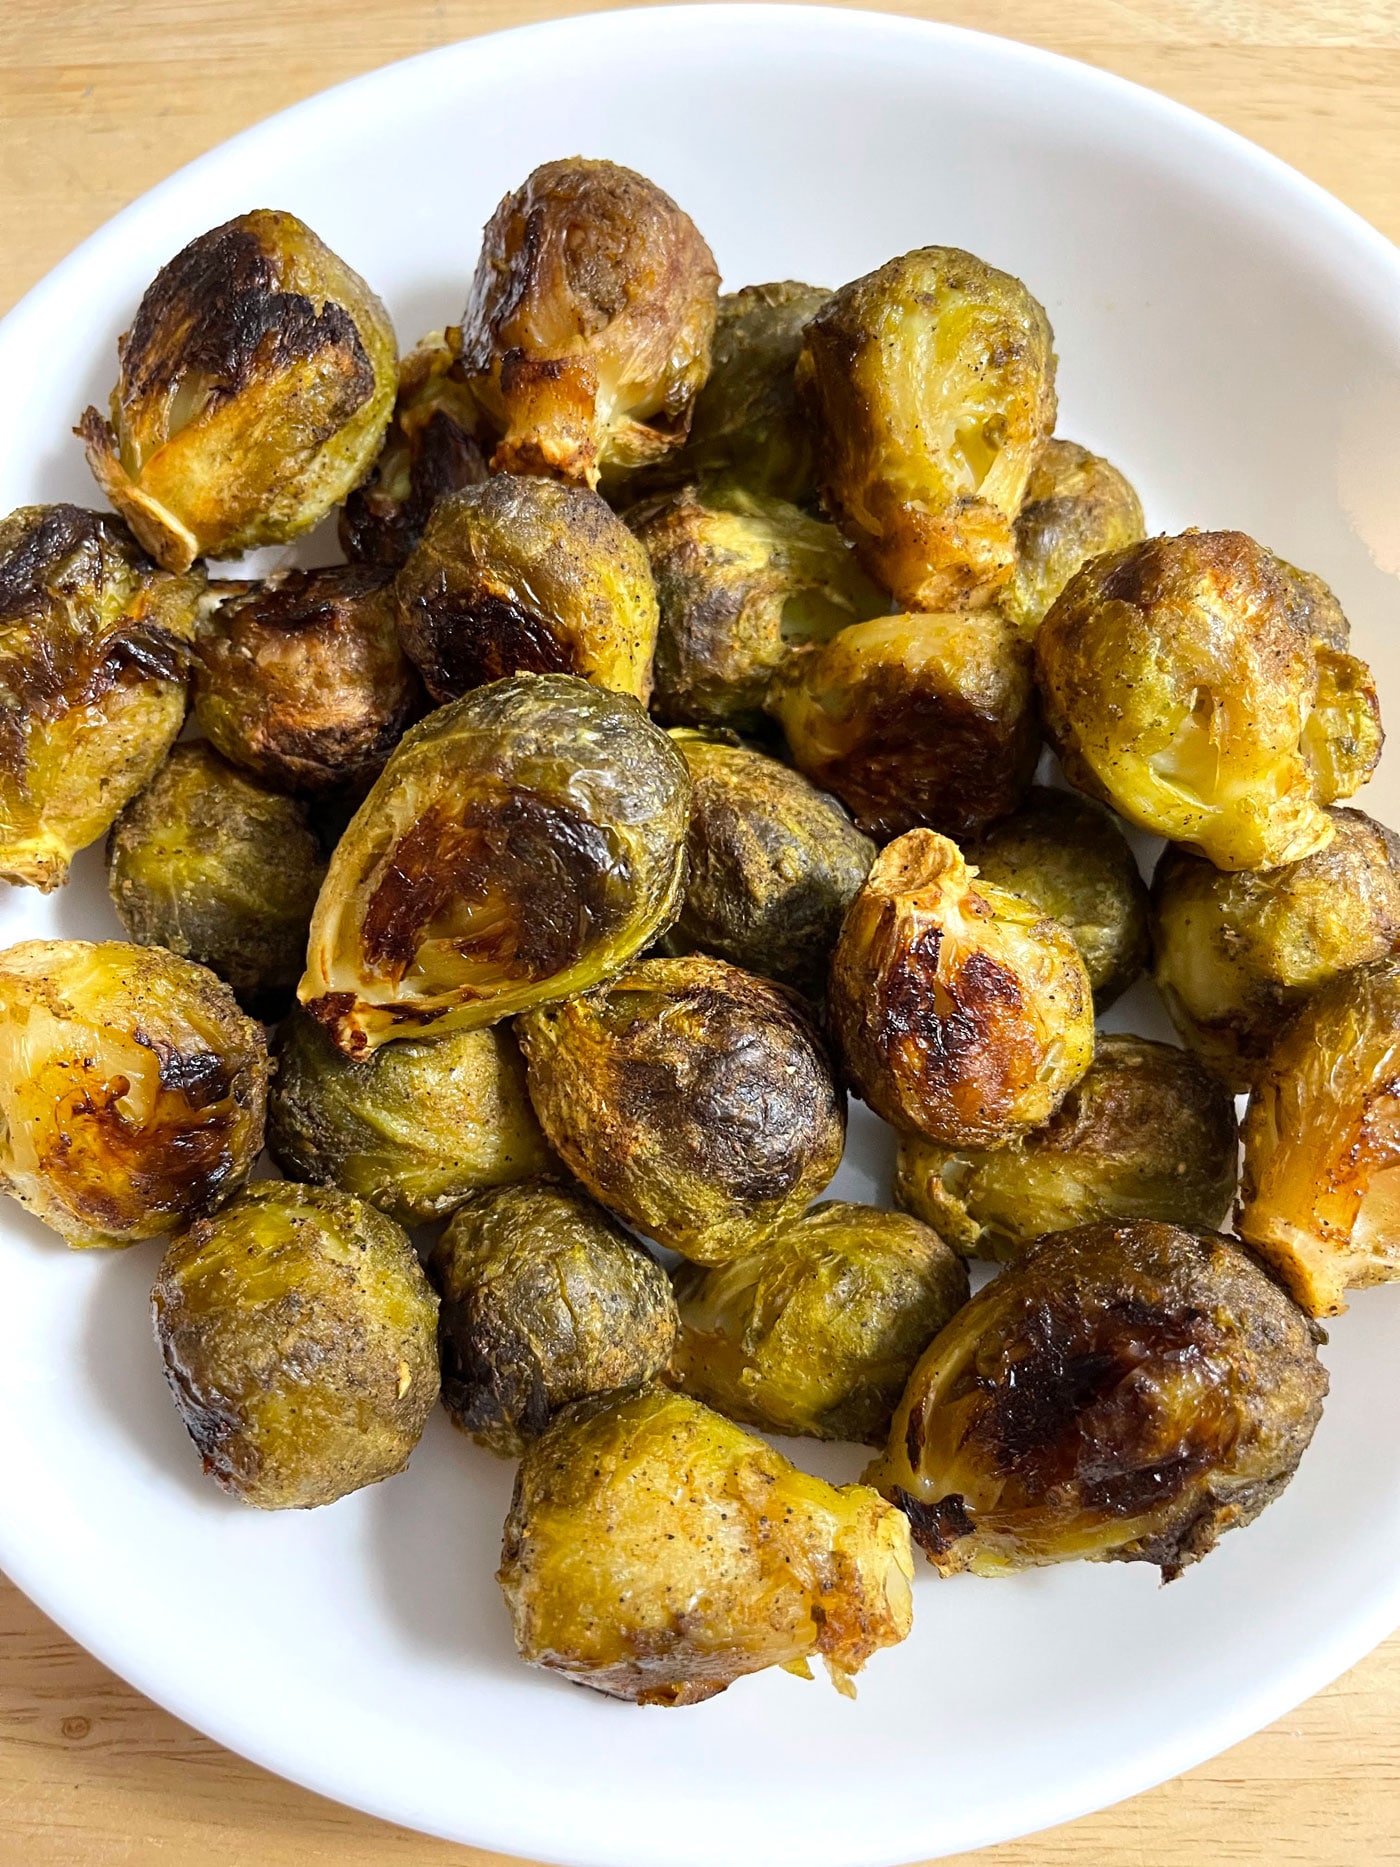 roasted frozen brussel sprouts with balsamic vinegar